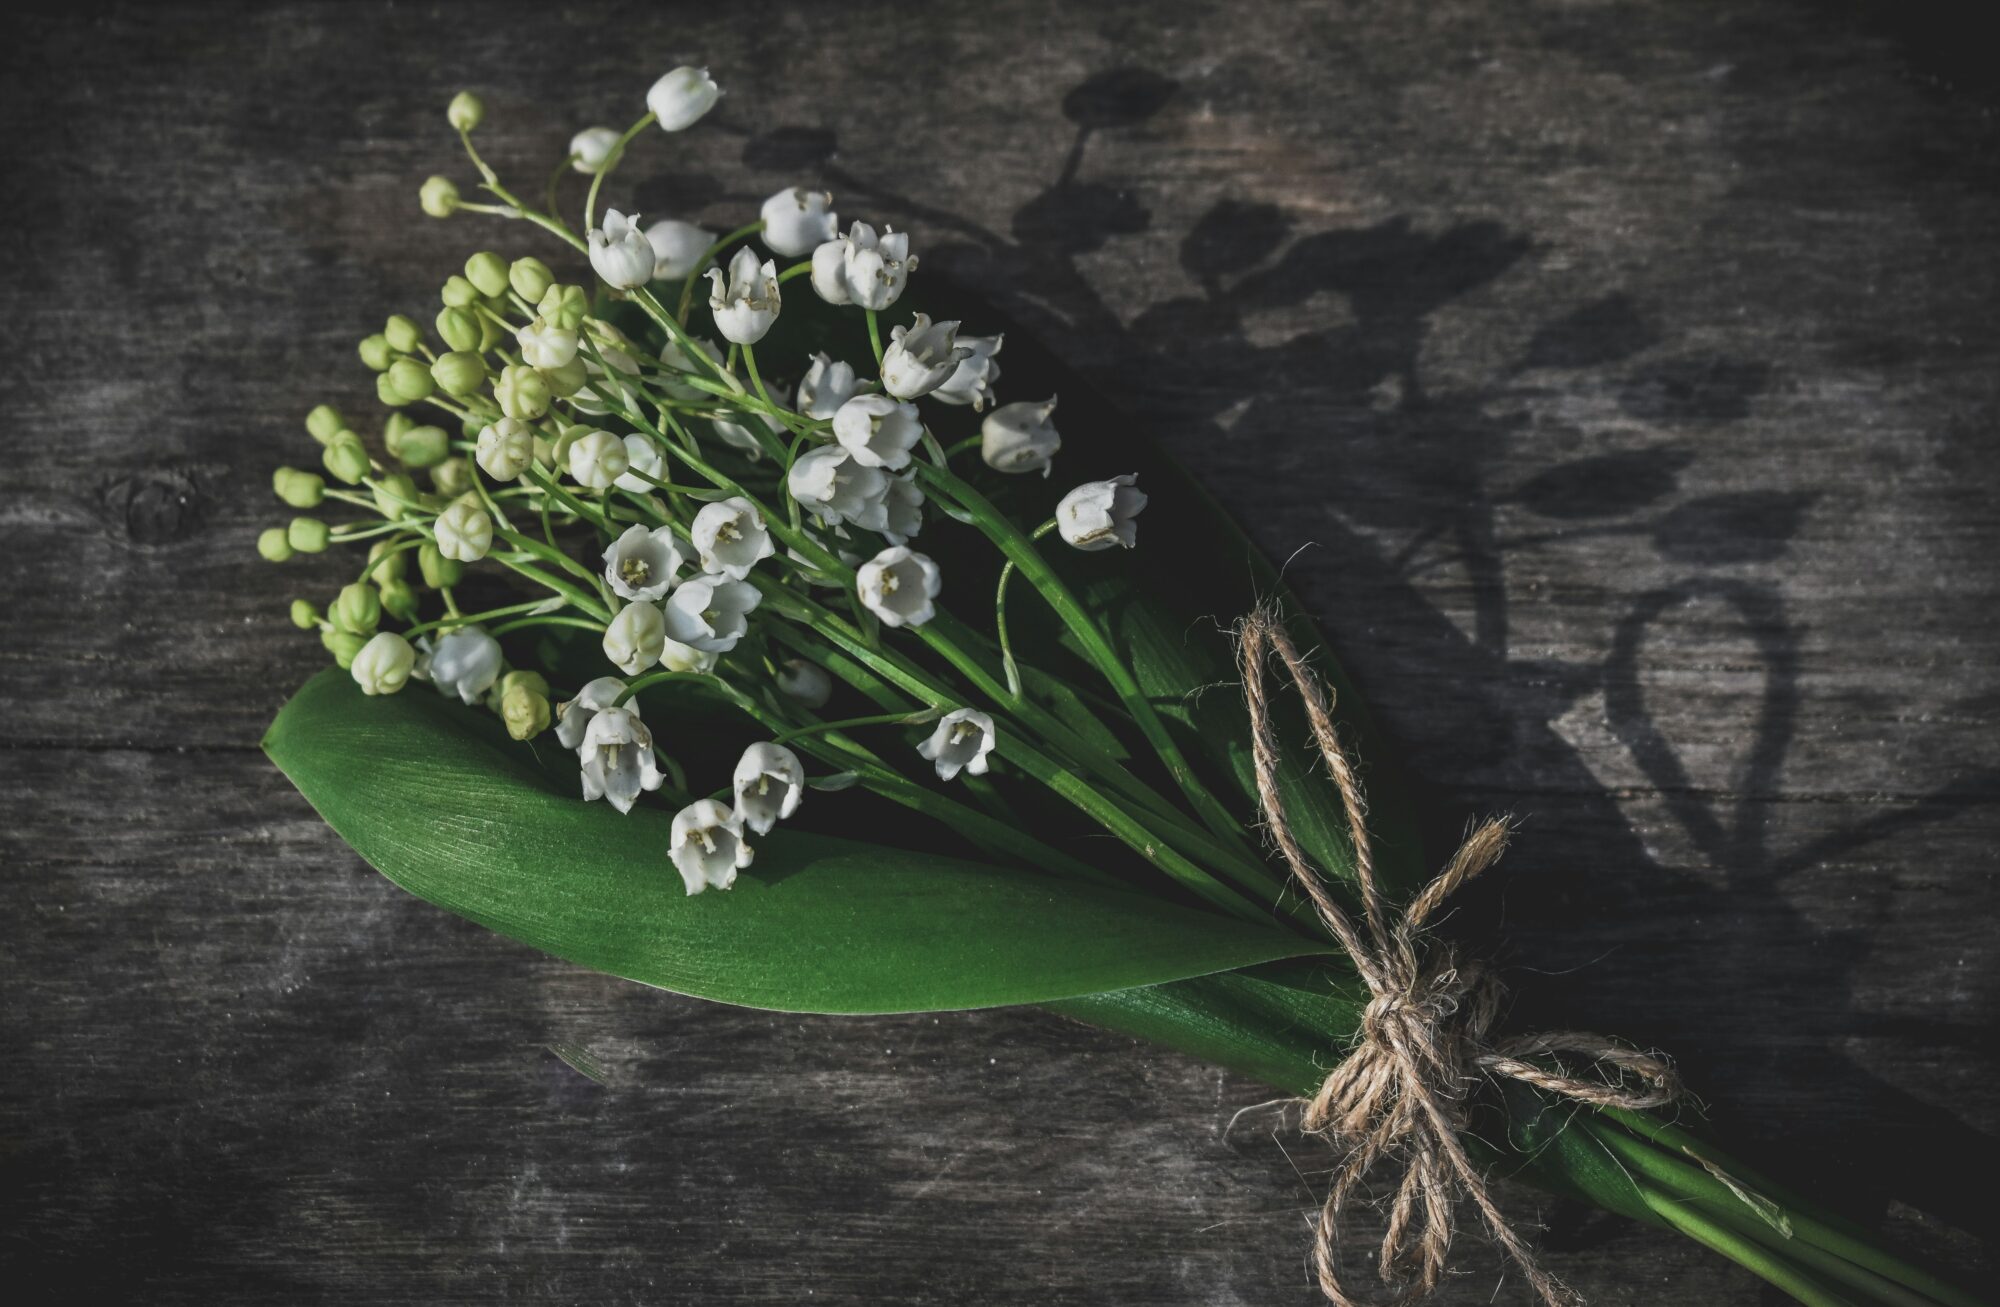 lily of the valley represents sadness, this is a tied bouquet.